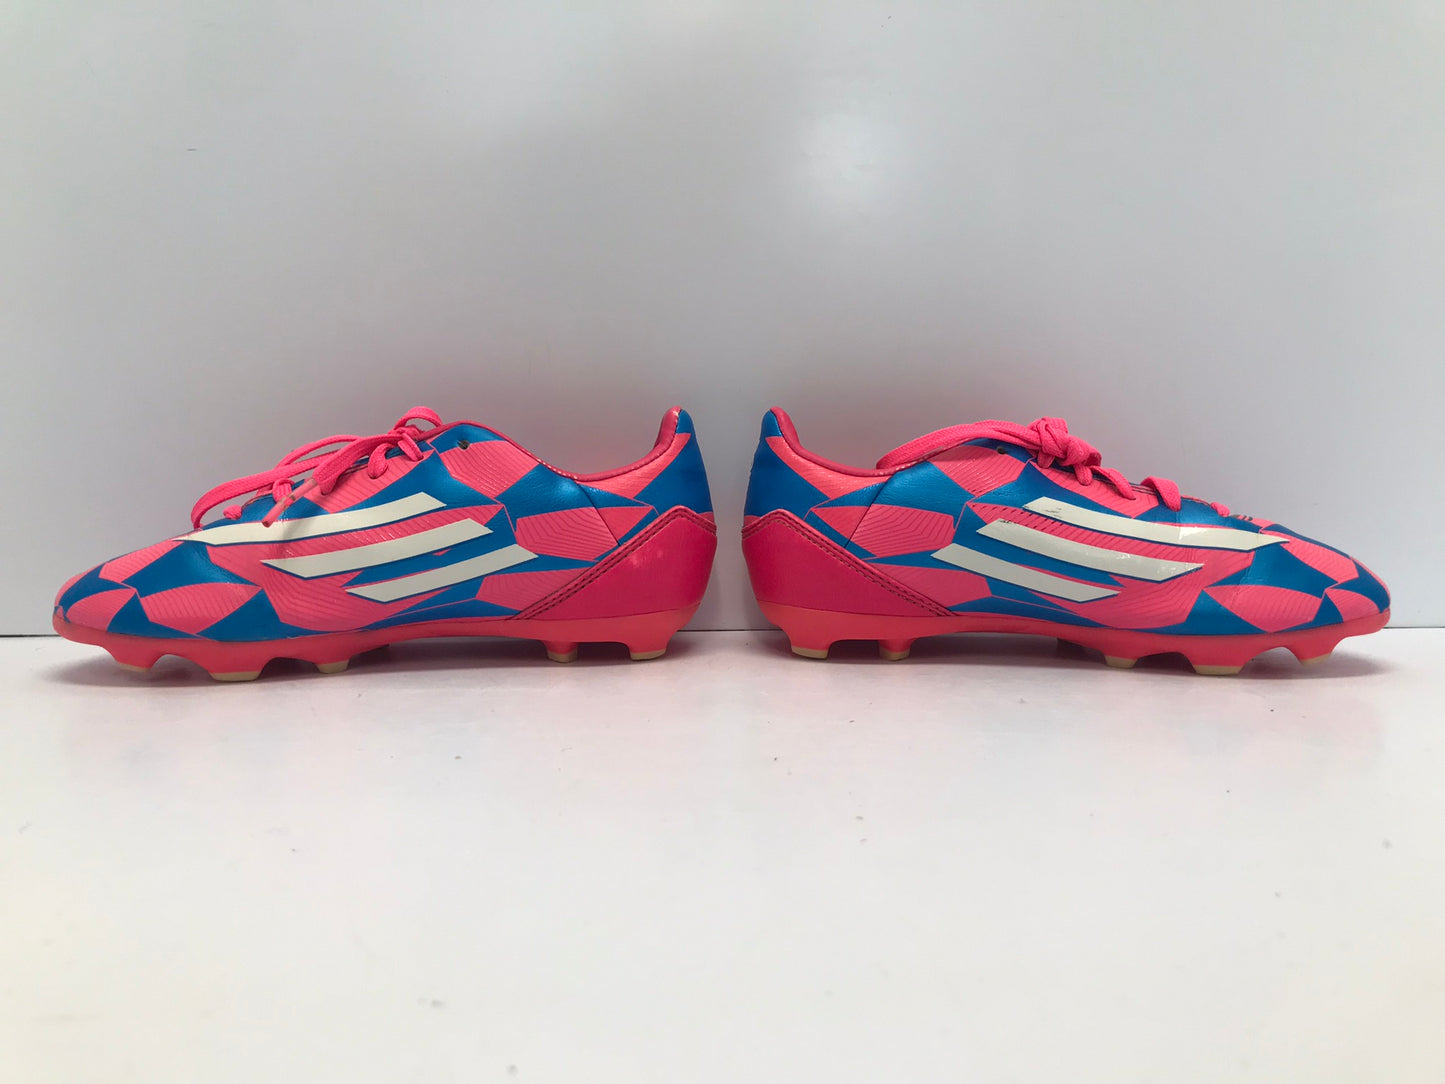 Soccer Shoes Cleats Child Size 1 Adidas Pink Blue Excellent